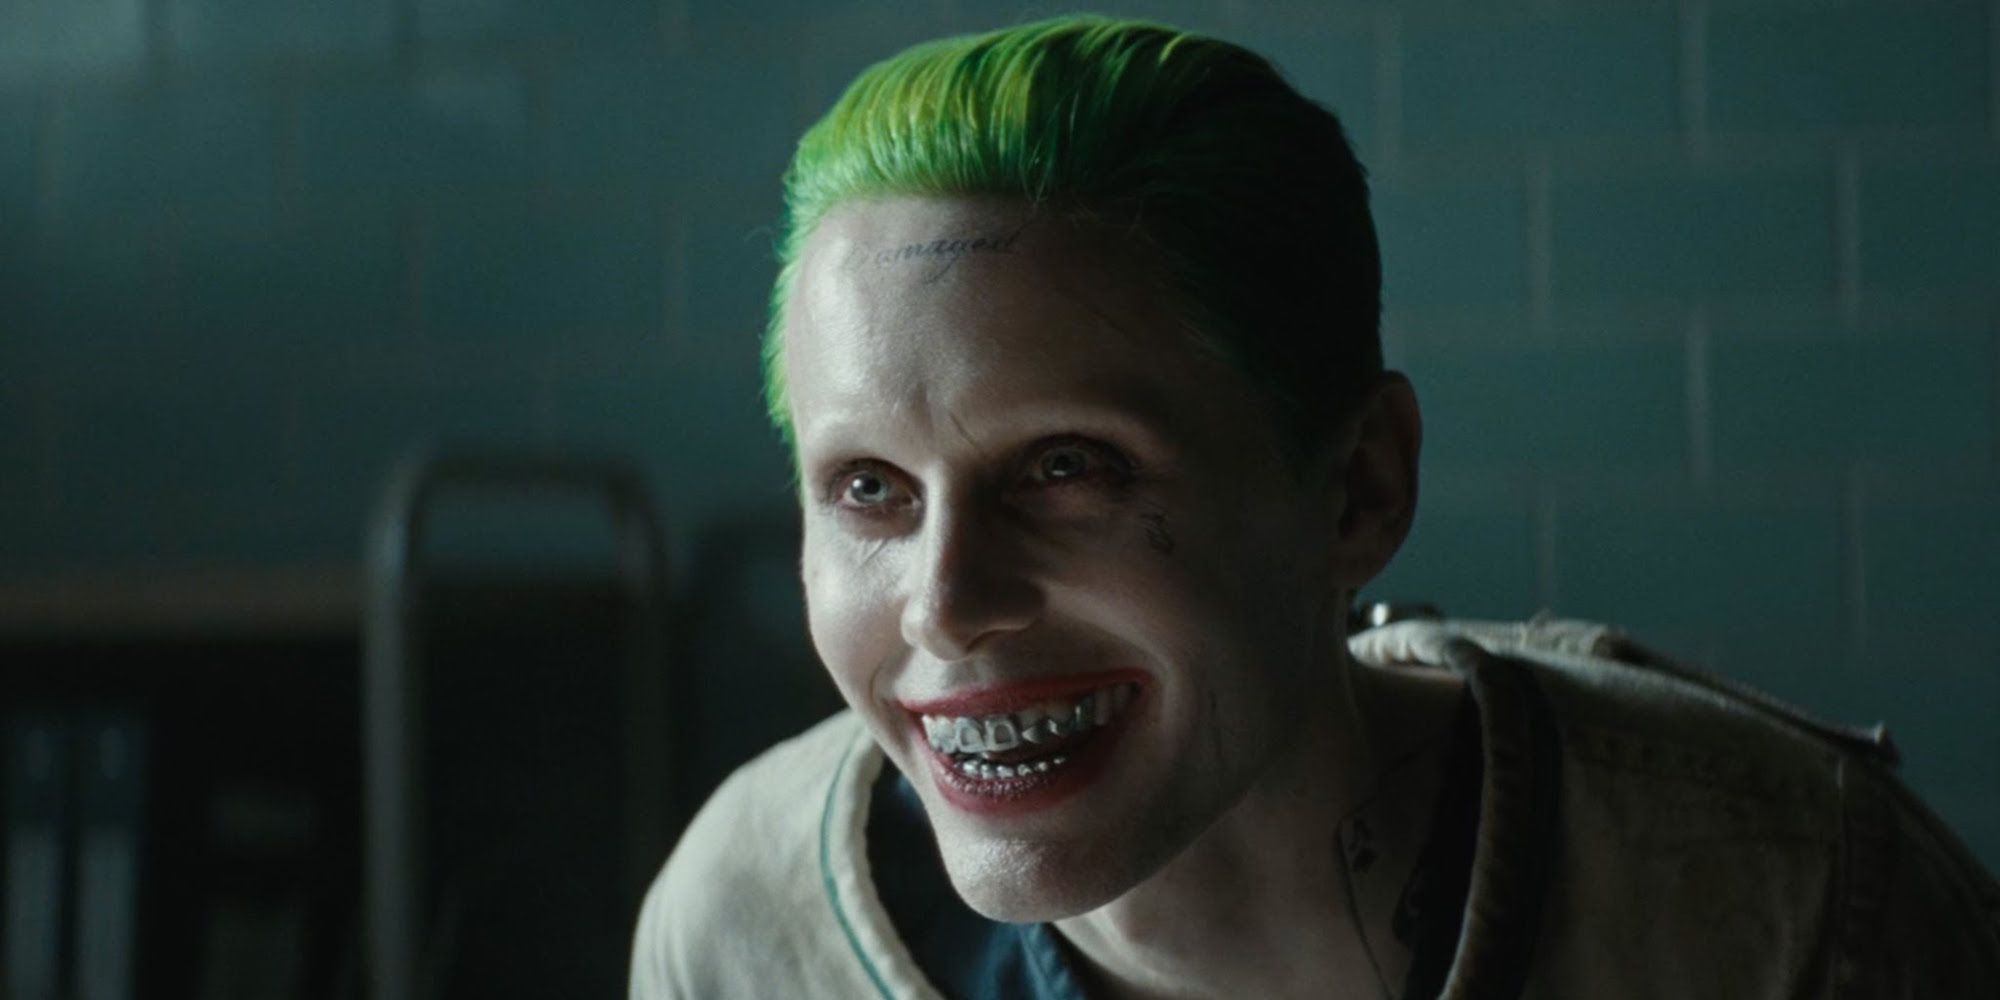 Jared Leto as the Joker in Suicide Squad smiling maniacally as he looks ahead